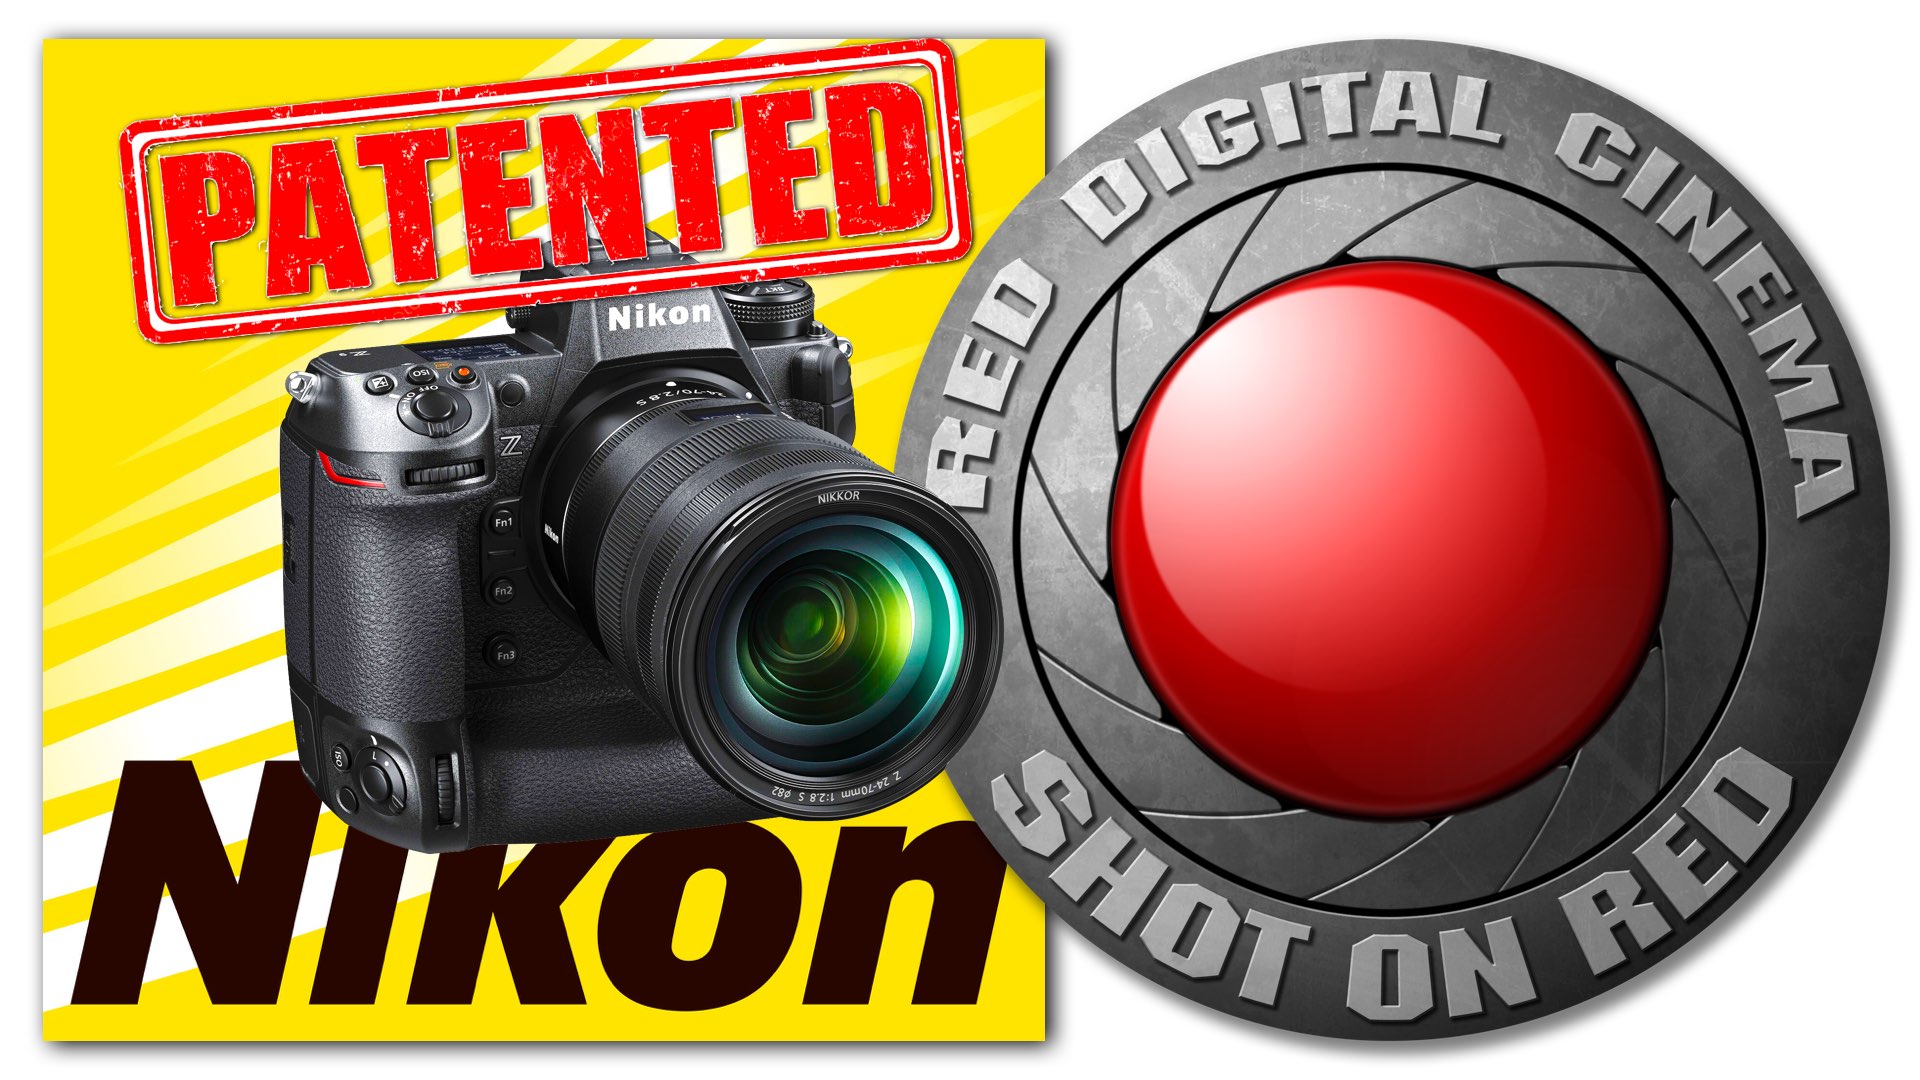 Nikon Denies and Fights Back to RED’s Lawsuit